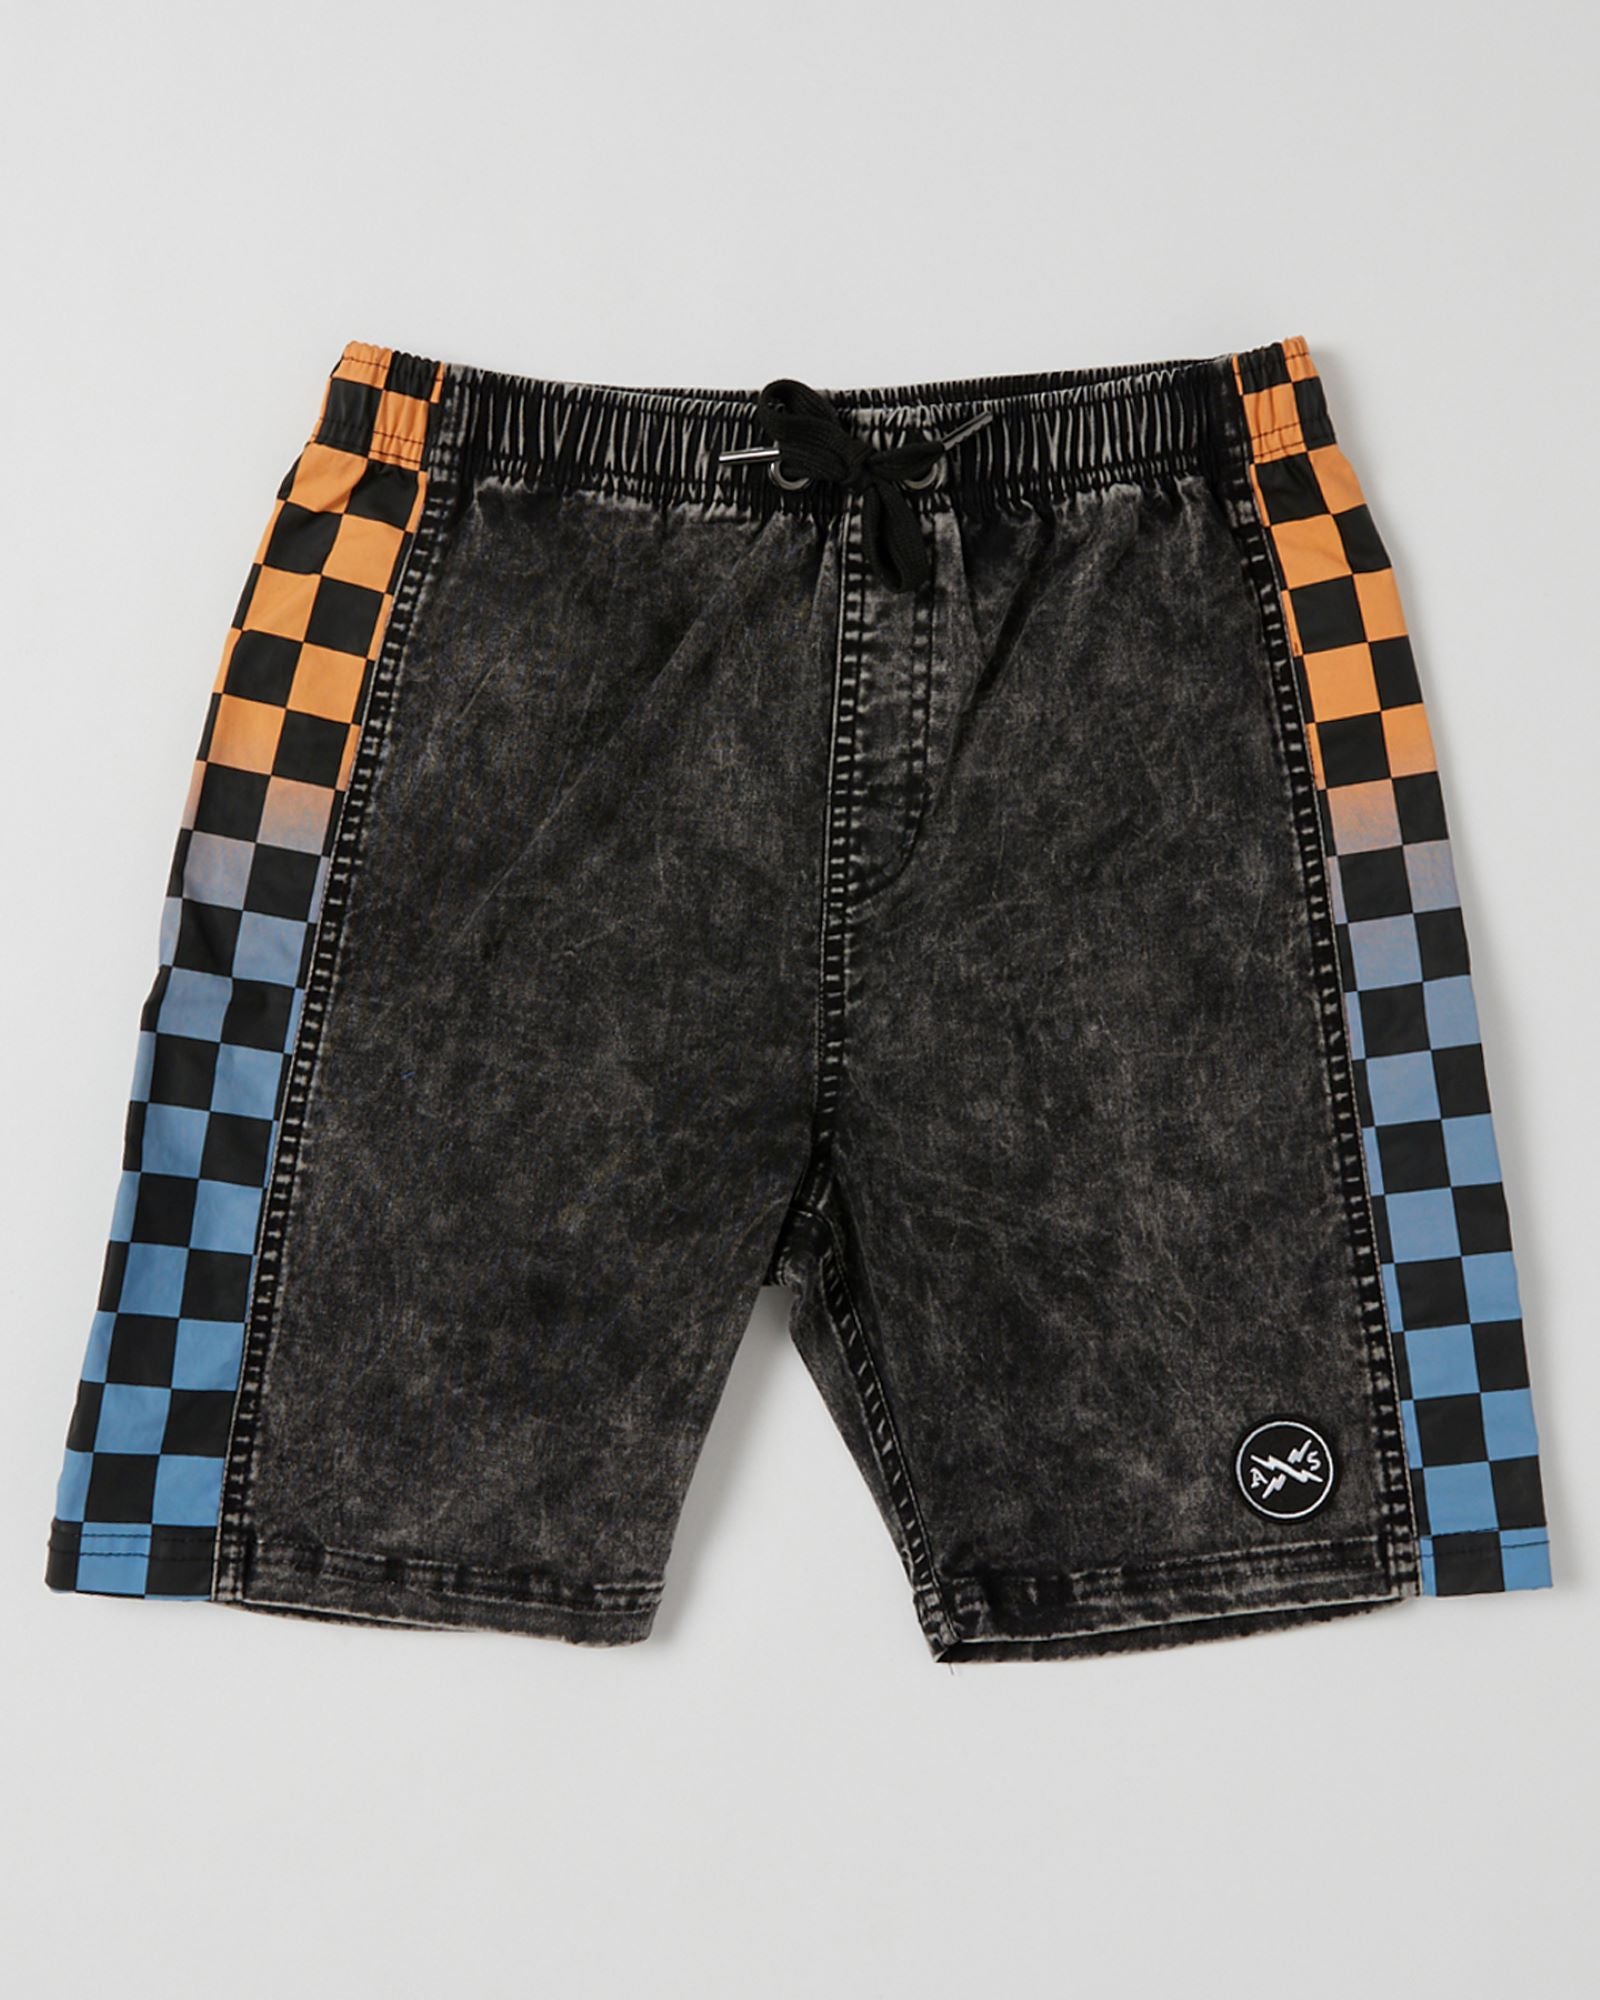 Alphabet Soup's Teen Check Mate Short for boys aged 8 to 16 offers an elastic waistband, adjustable drawstring, faux fly, and single back pocket with checkered panel detail.